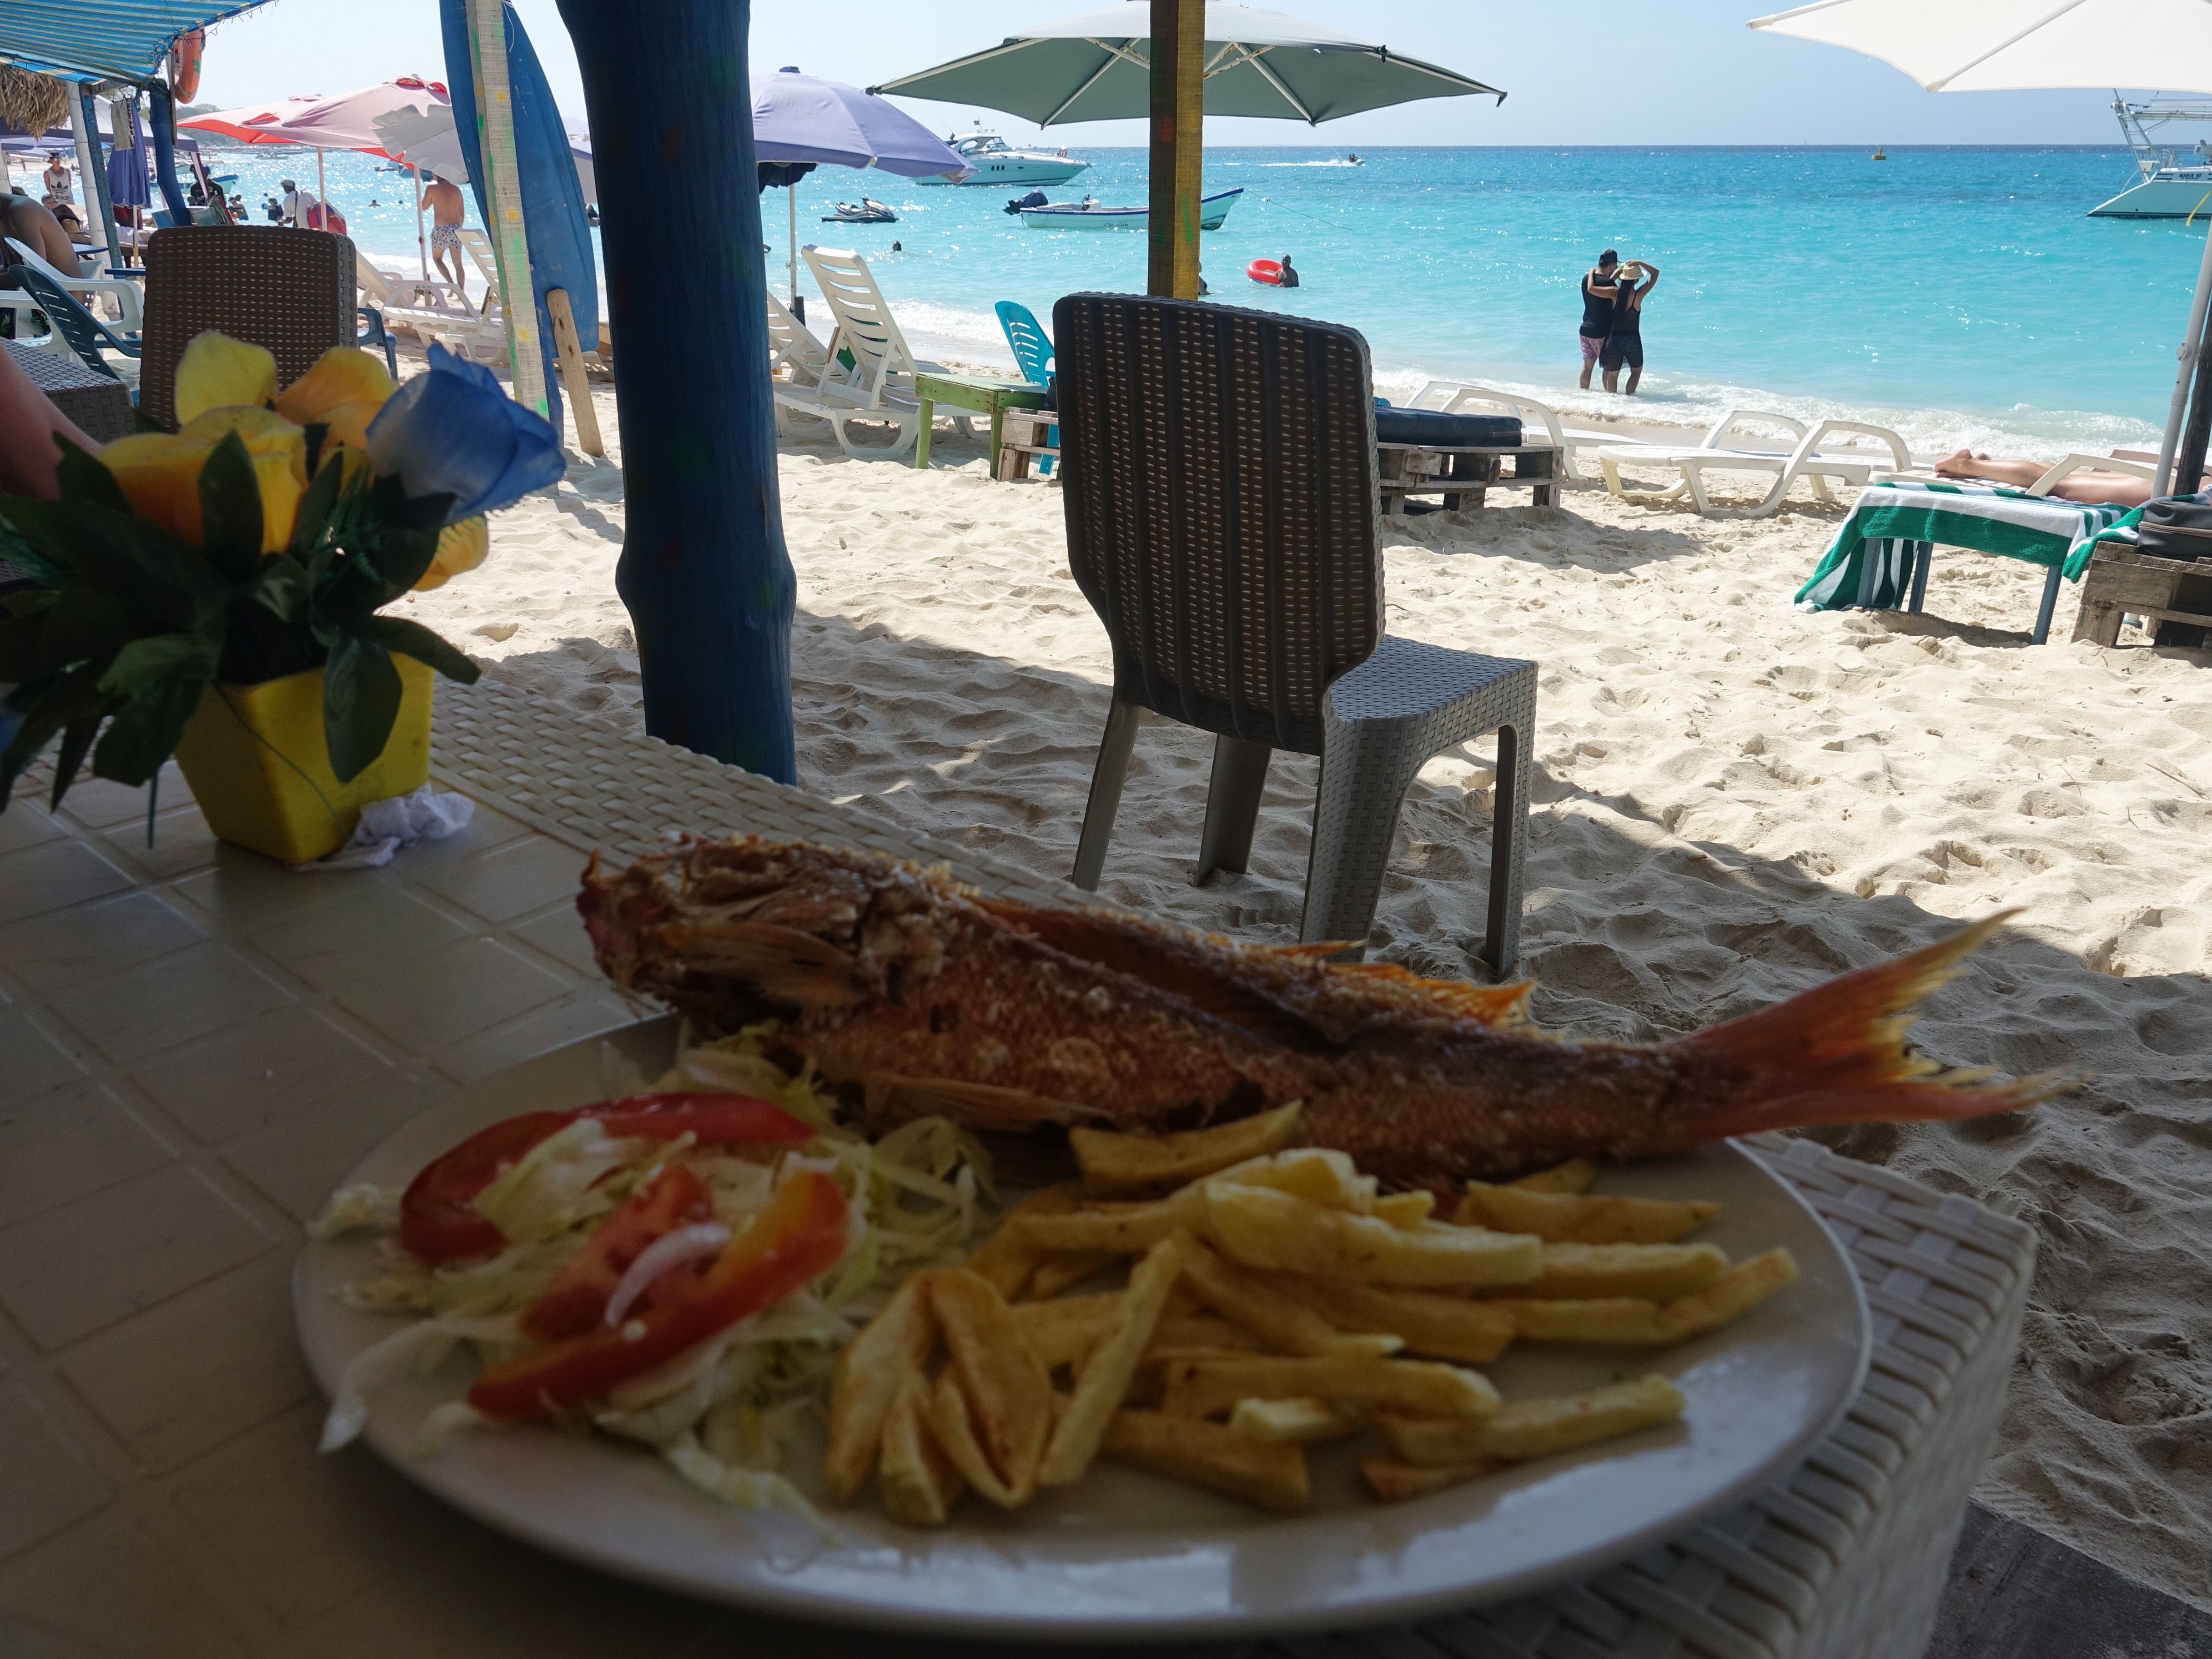 Fresh whole fried fish lunch at the beach